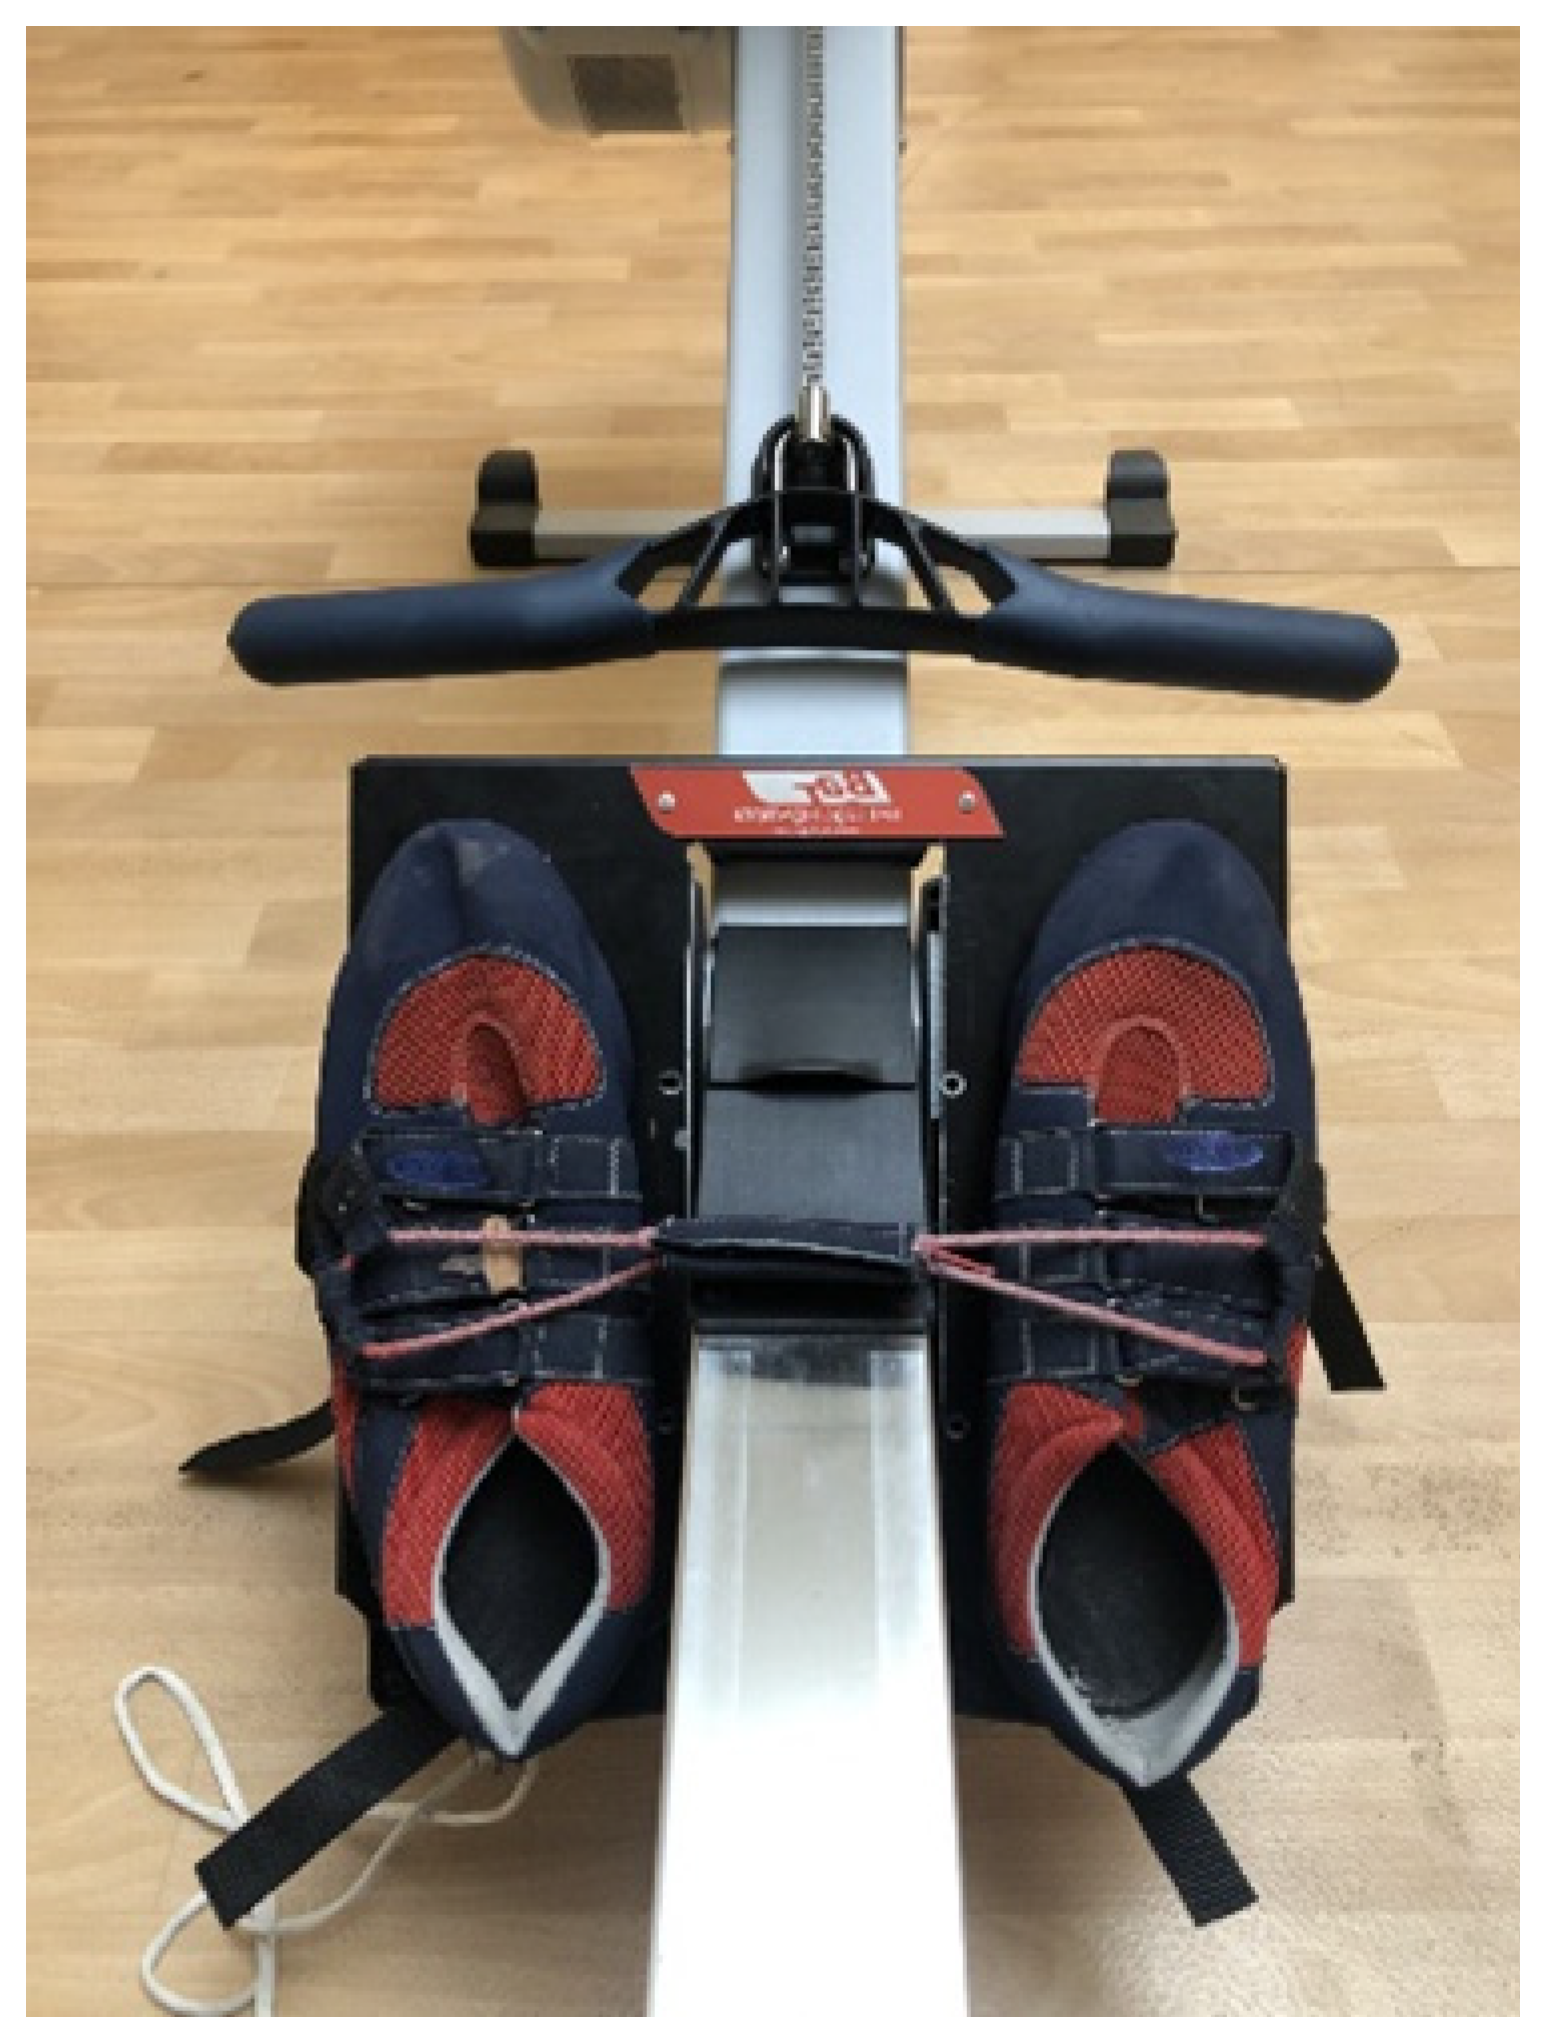 Sensors | Free Full-Text | Validation of Plantar Pressure and Reaction Force  Measured by Moticon Pressure Sensor Insoles on a Concept2 Rowing Ergometer  | HTML